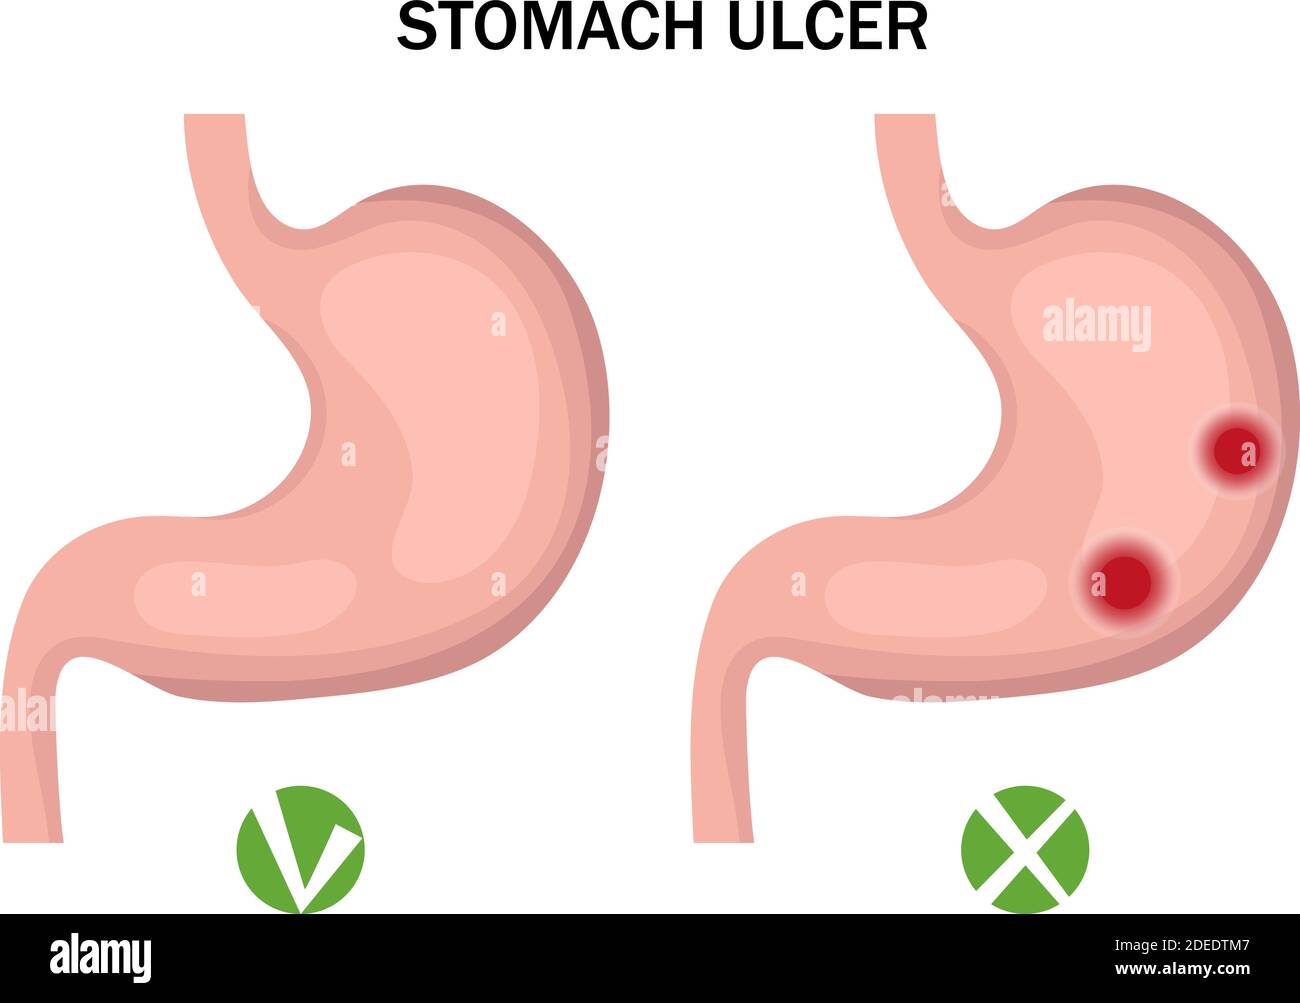 Stomach ulcer and healthy stomach infographics. Medicine concept. Vector illustration Stock Vector